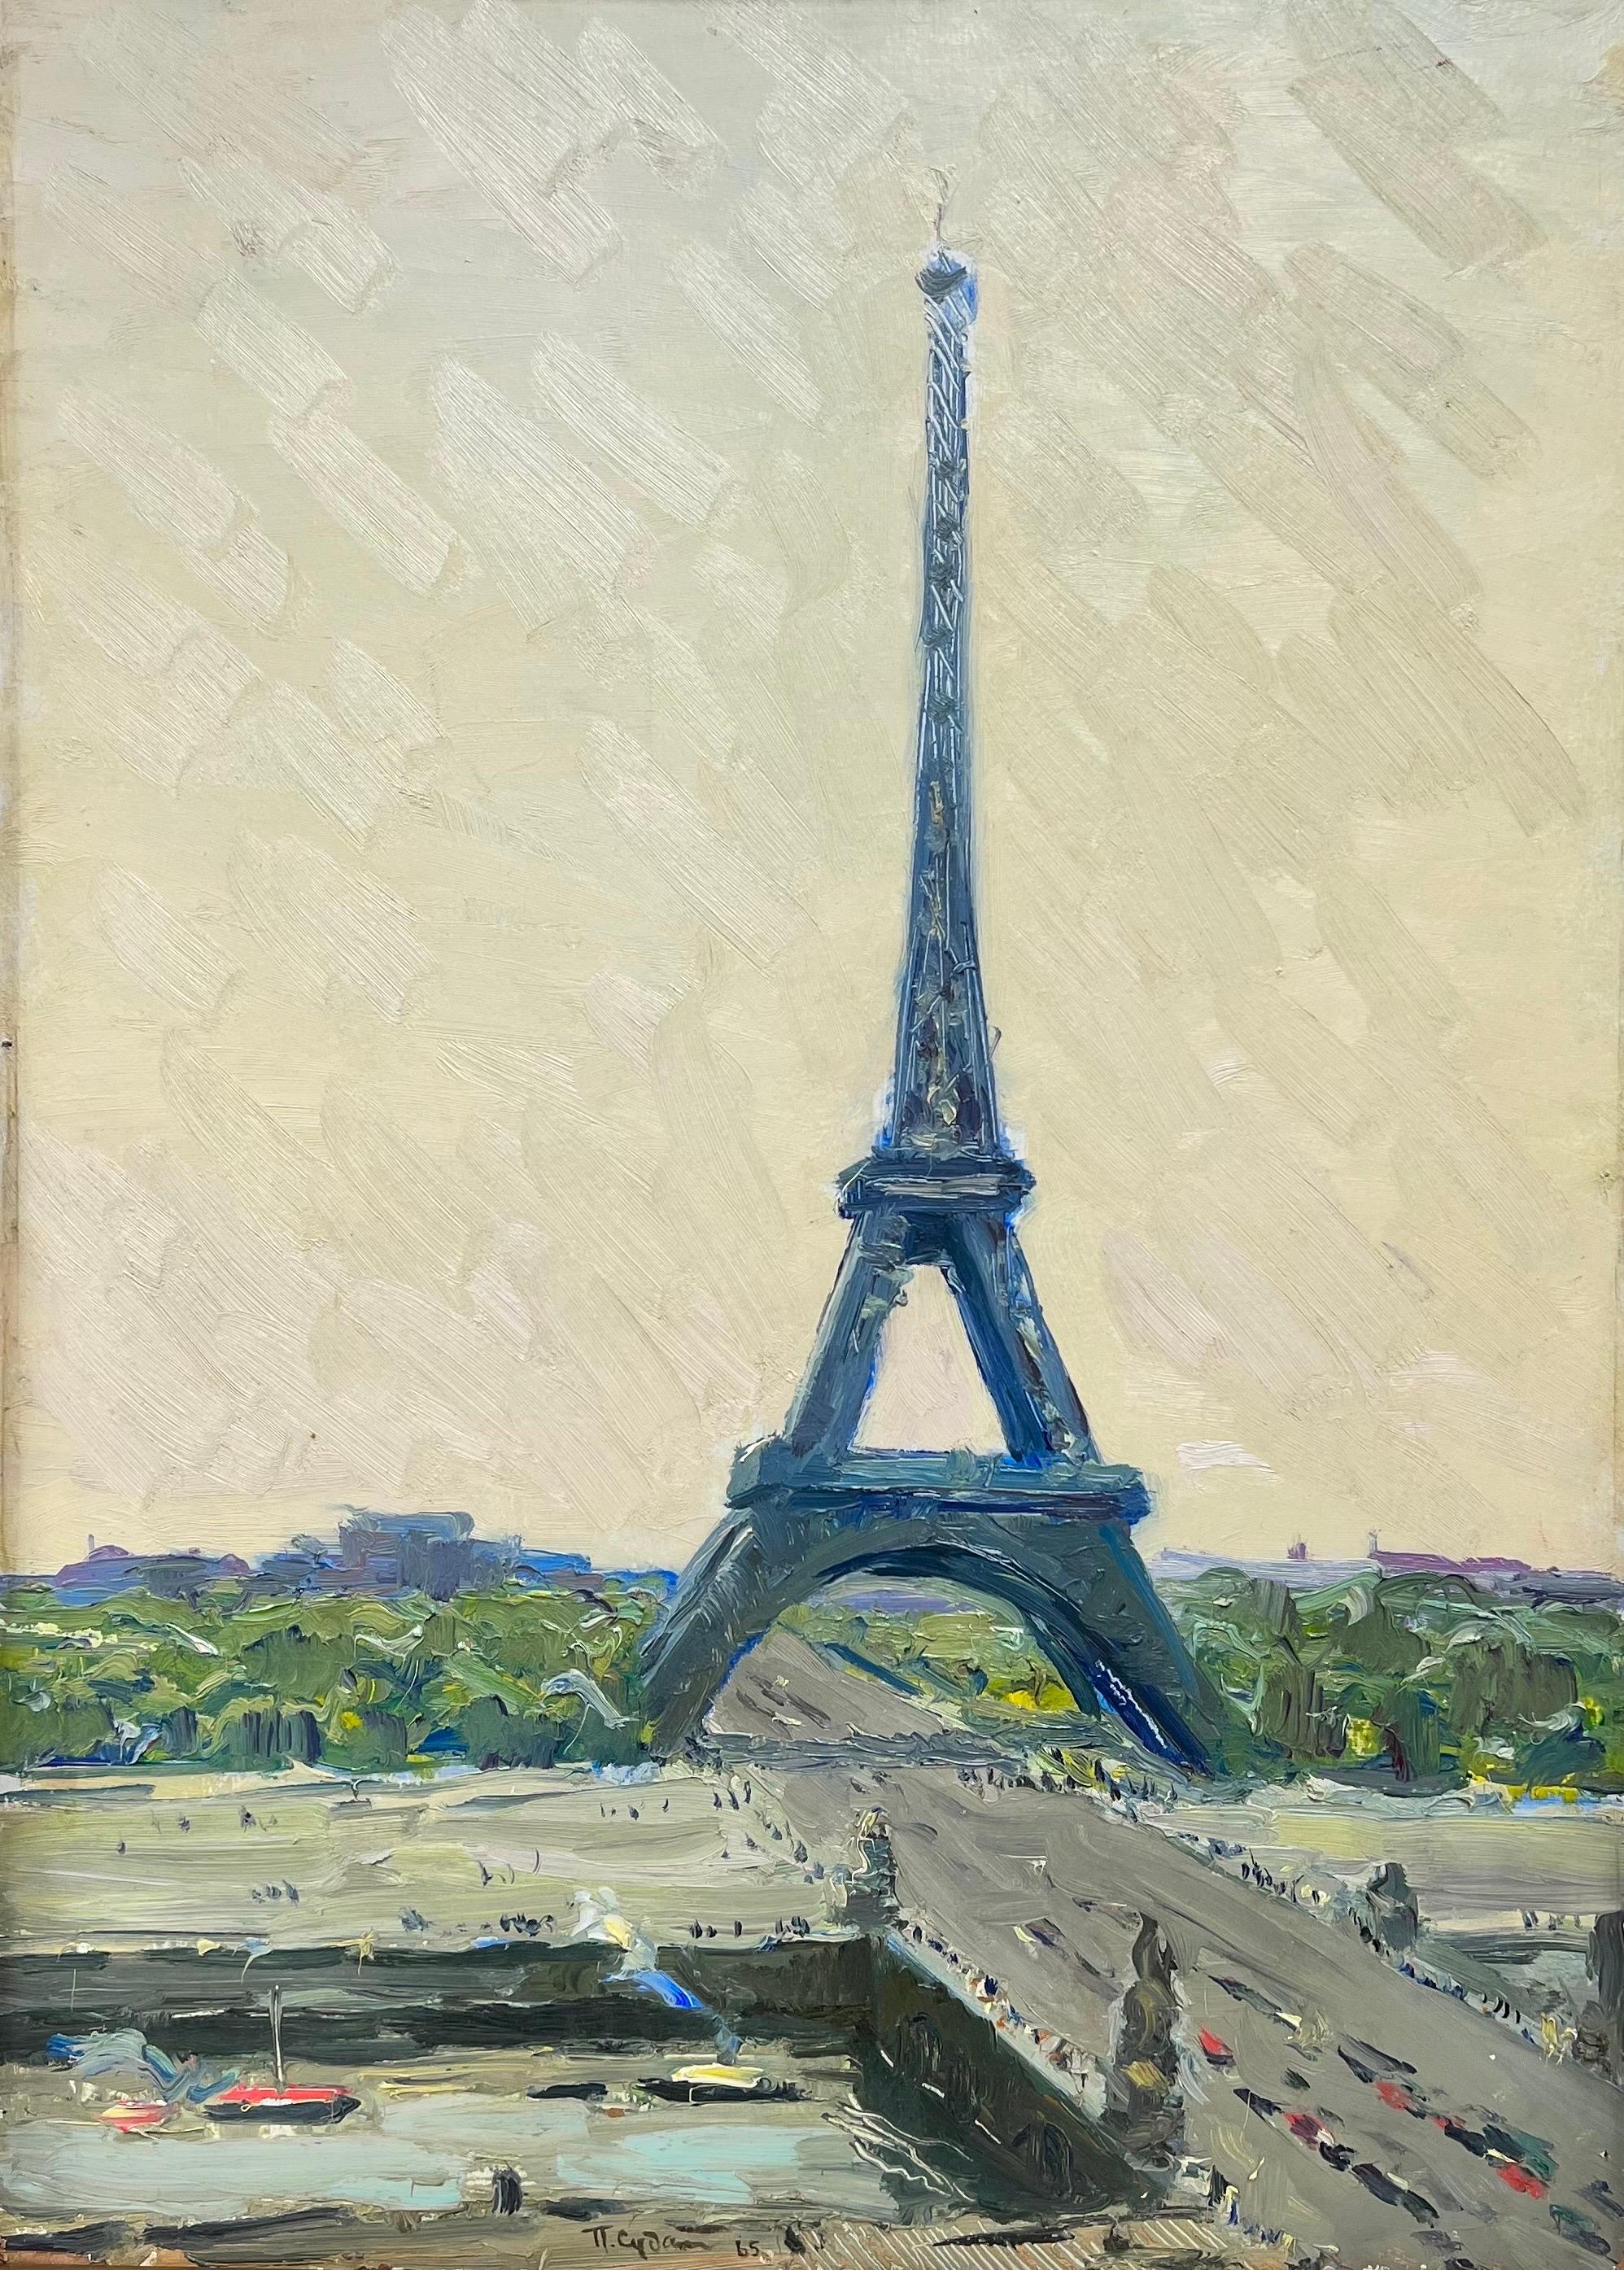 Eastern European Landscape Painting - The Eiffel Tower Paris, 1960's Signed Impressionist Painting Mystery Signature